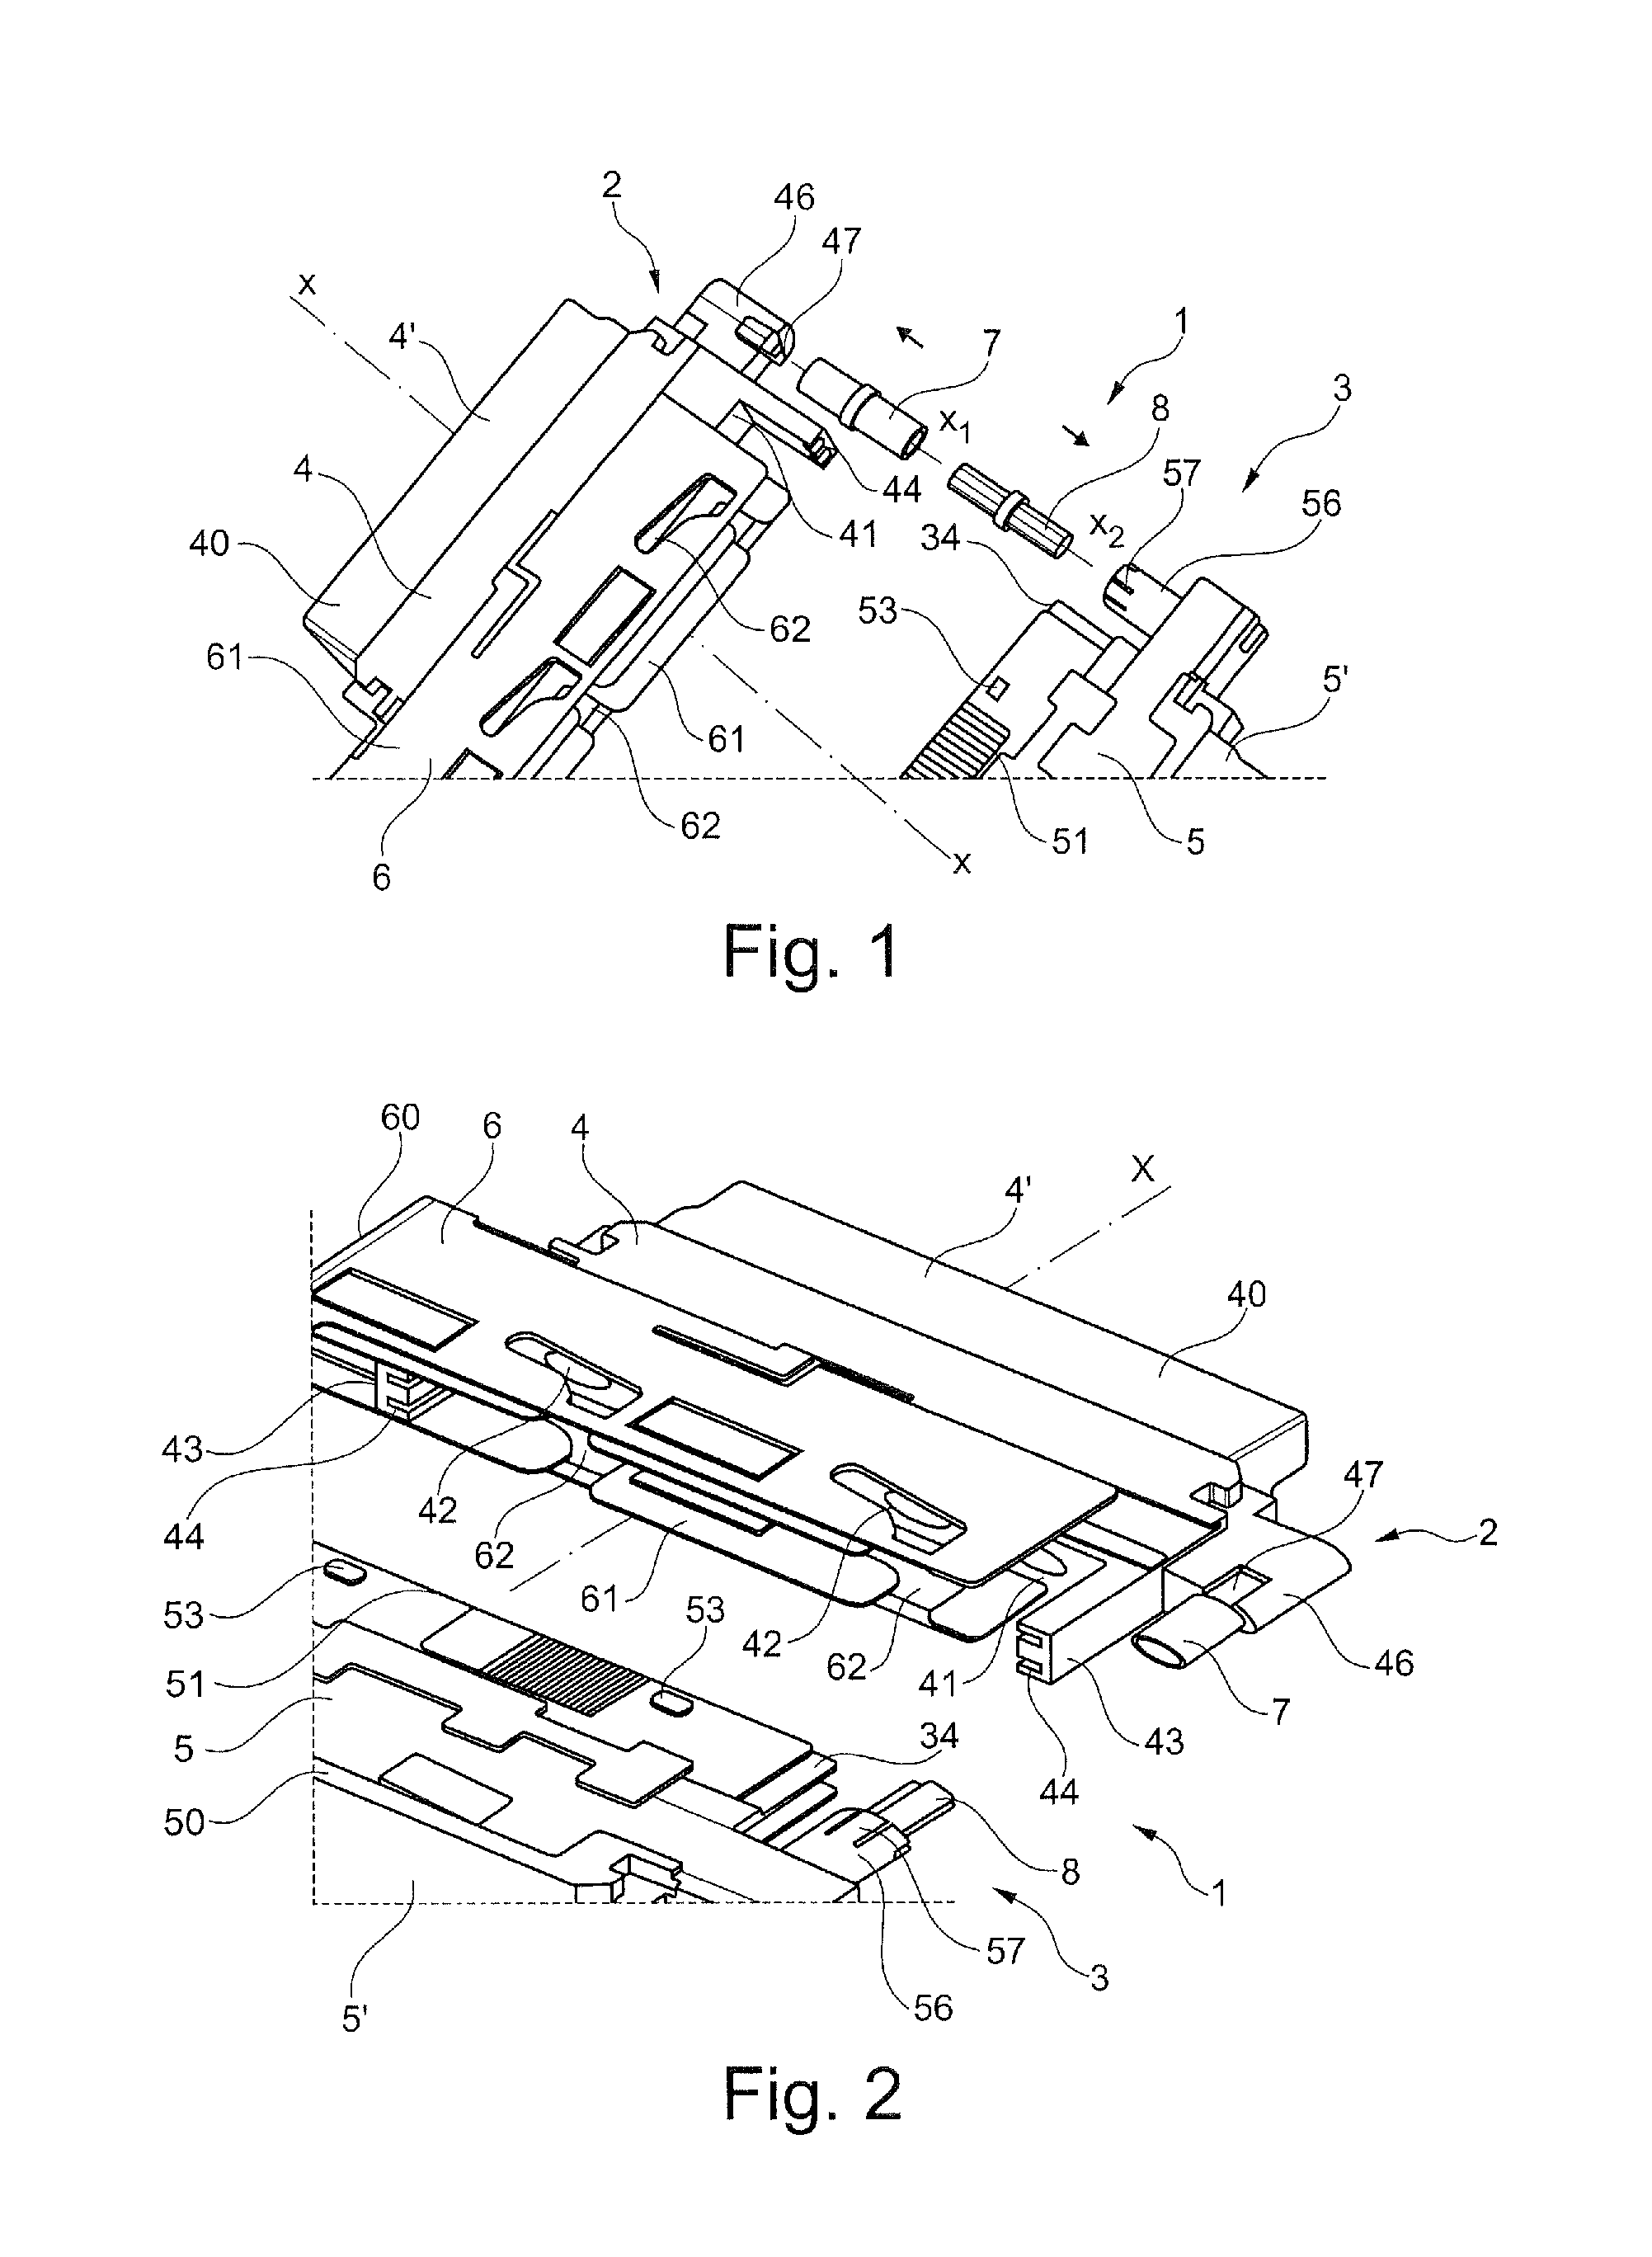 Connection assembly having multi-contact connectors with a polarizing system using keys